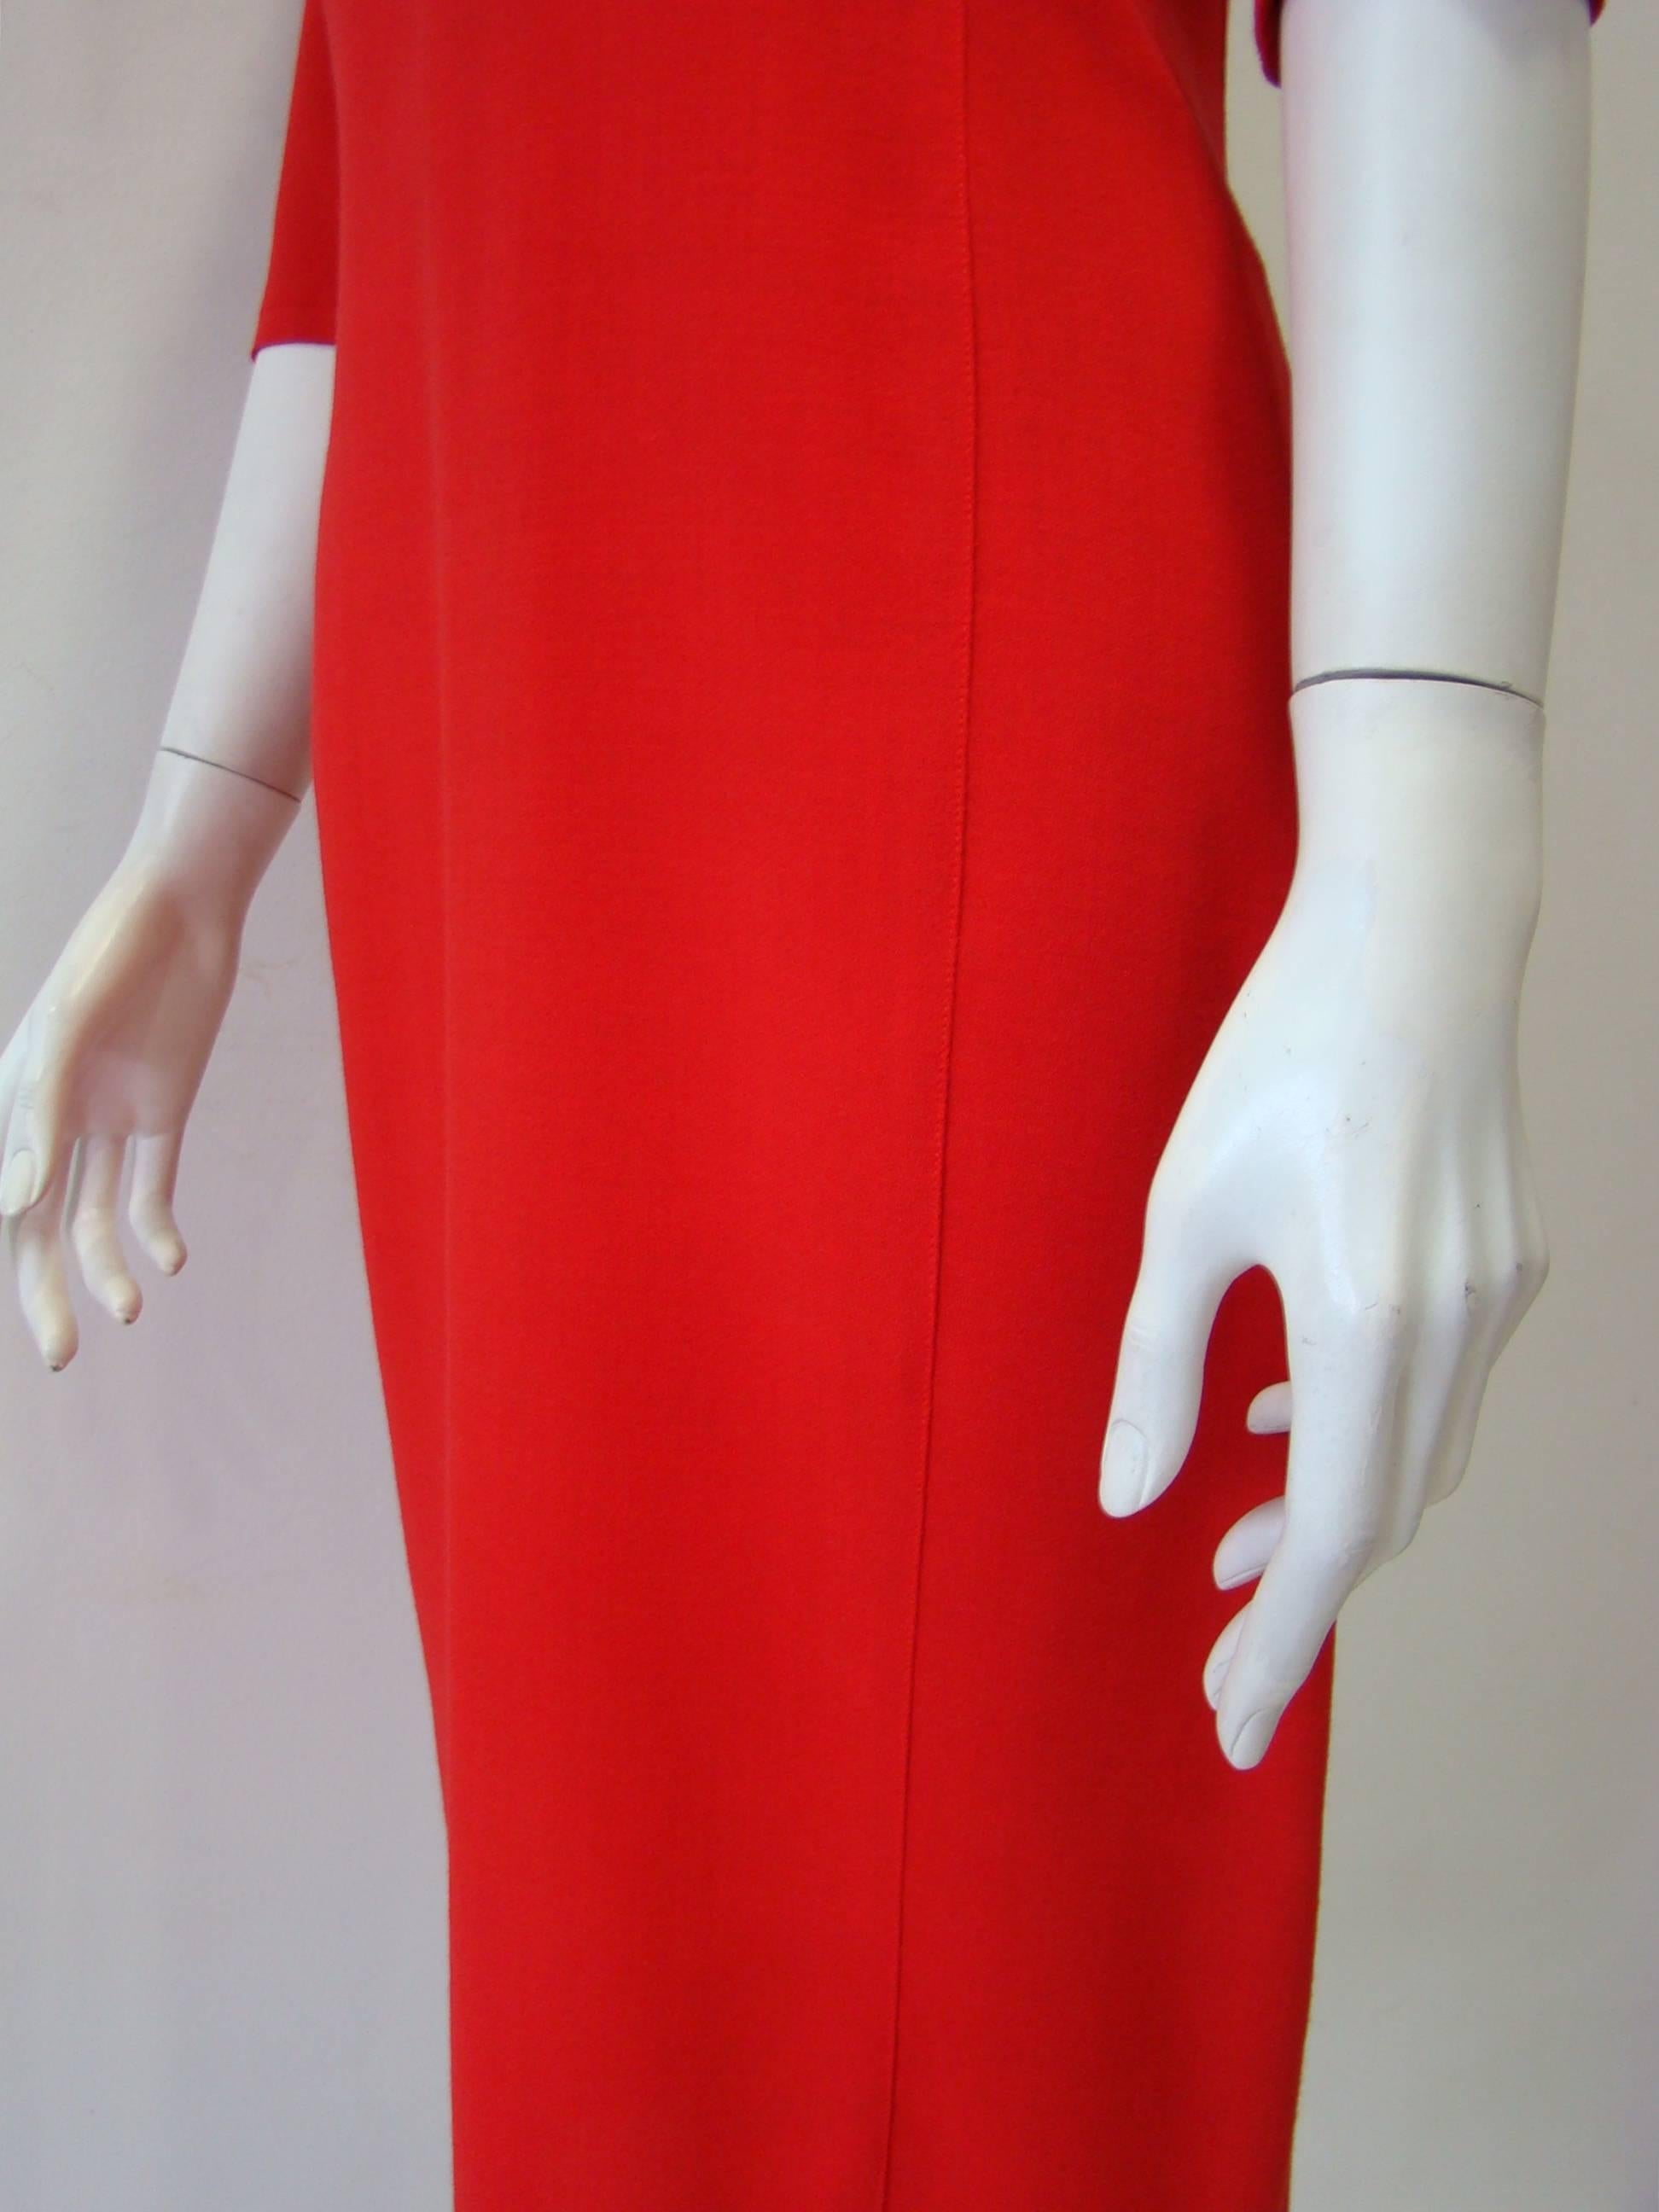 Women's Rare Gianni Versace Red Dress  For Sale